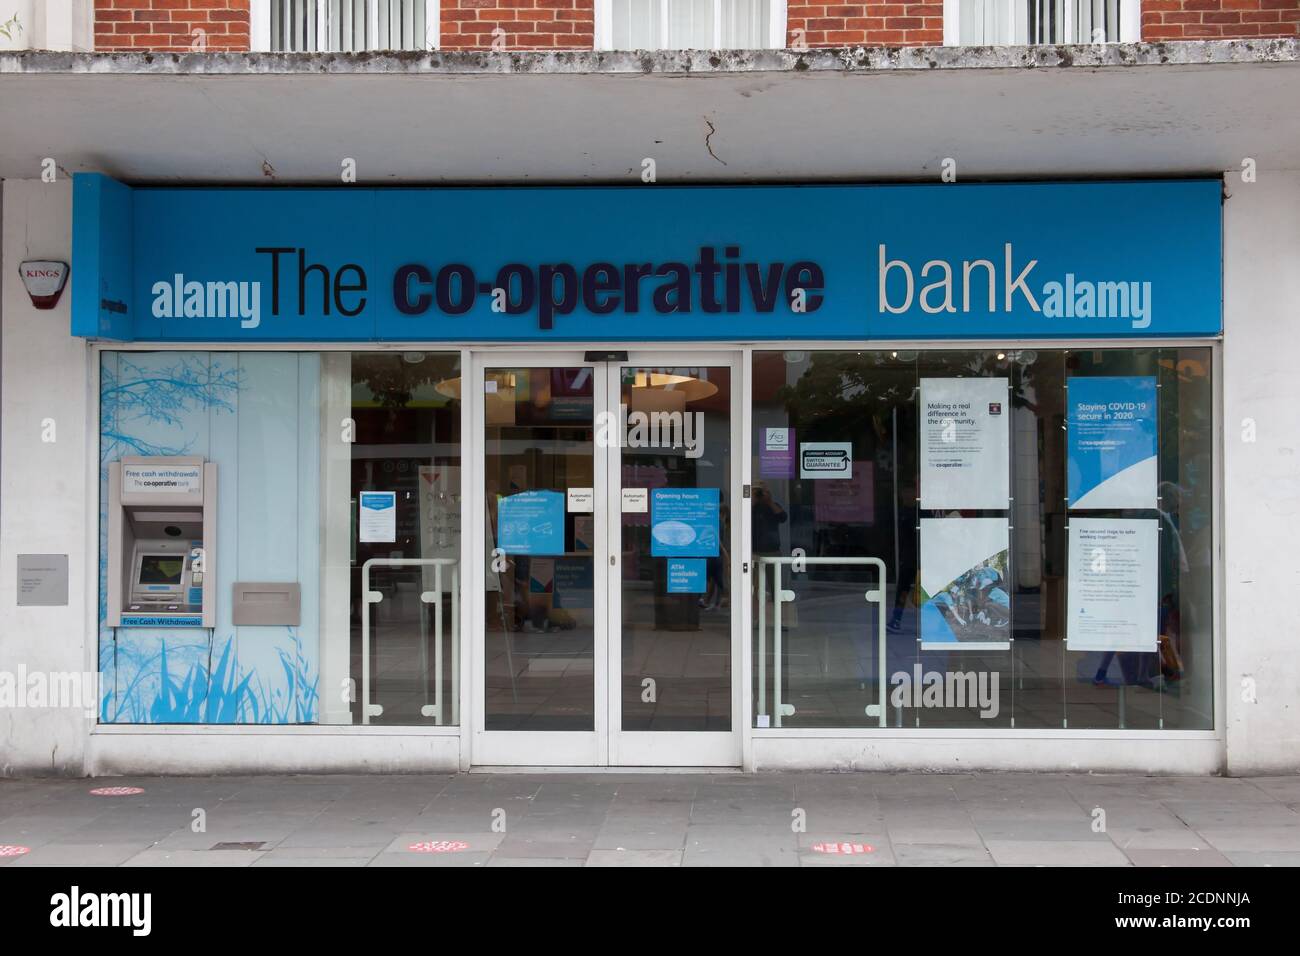 The Co-operative Bank in Southampton, in the UK, taken 10th July 2020 Stock Photo